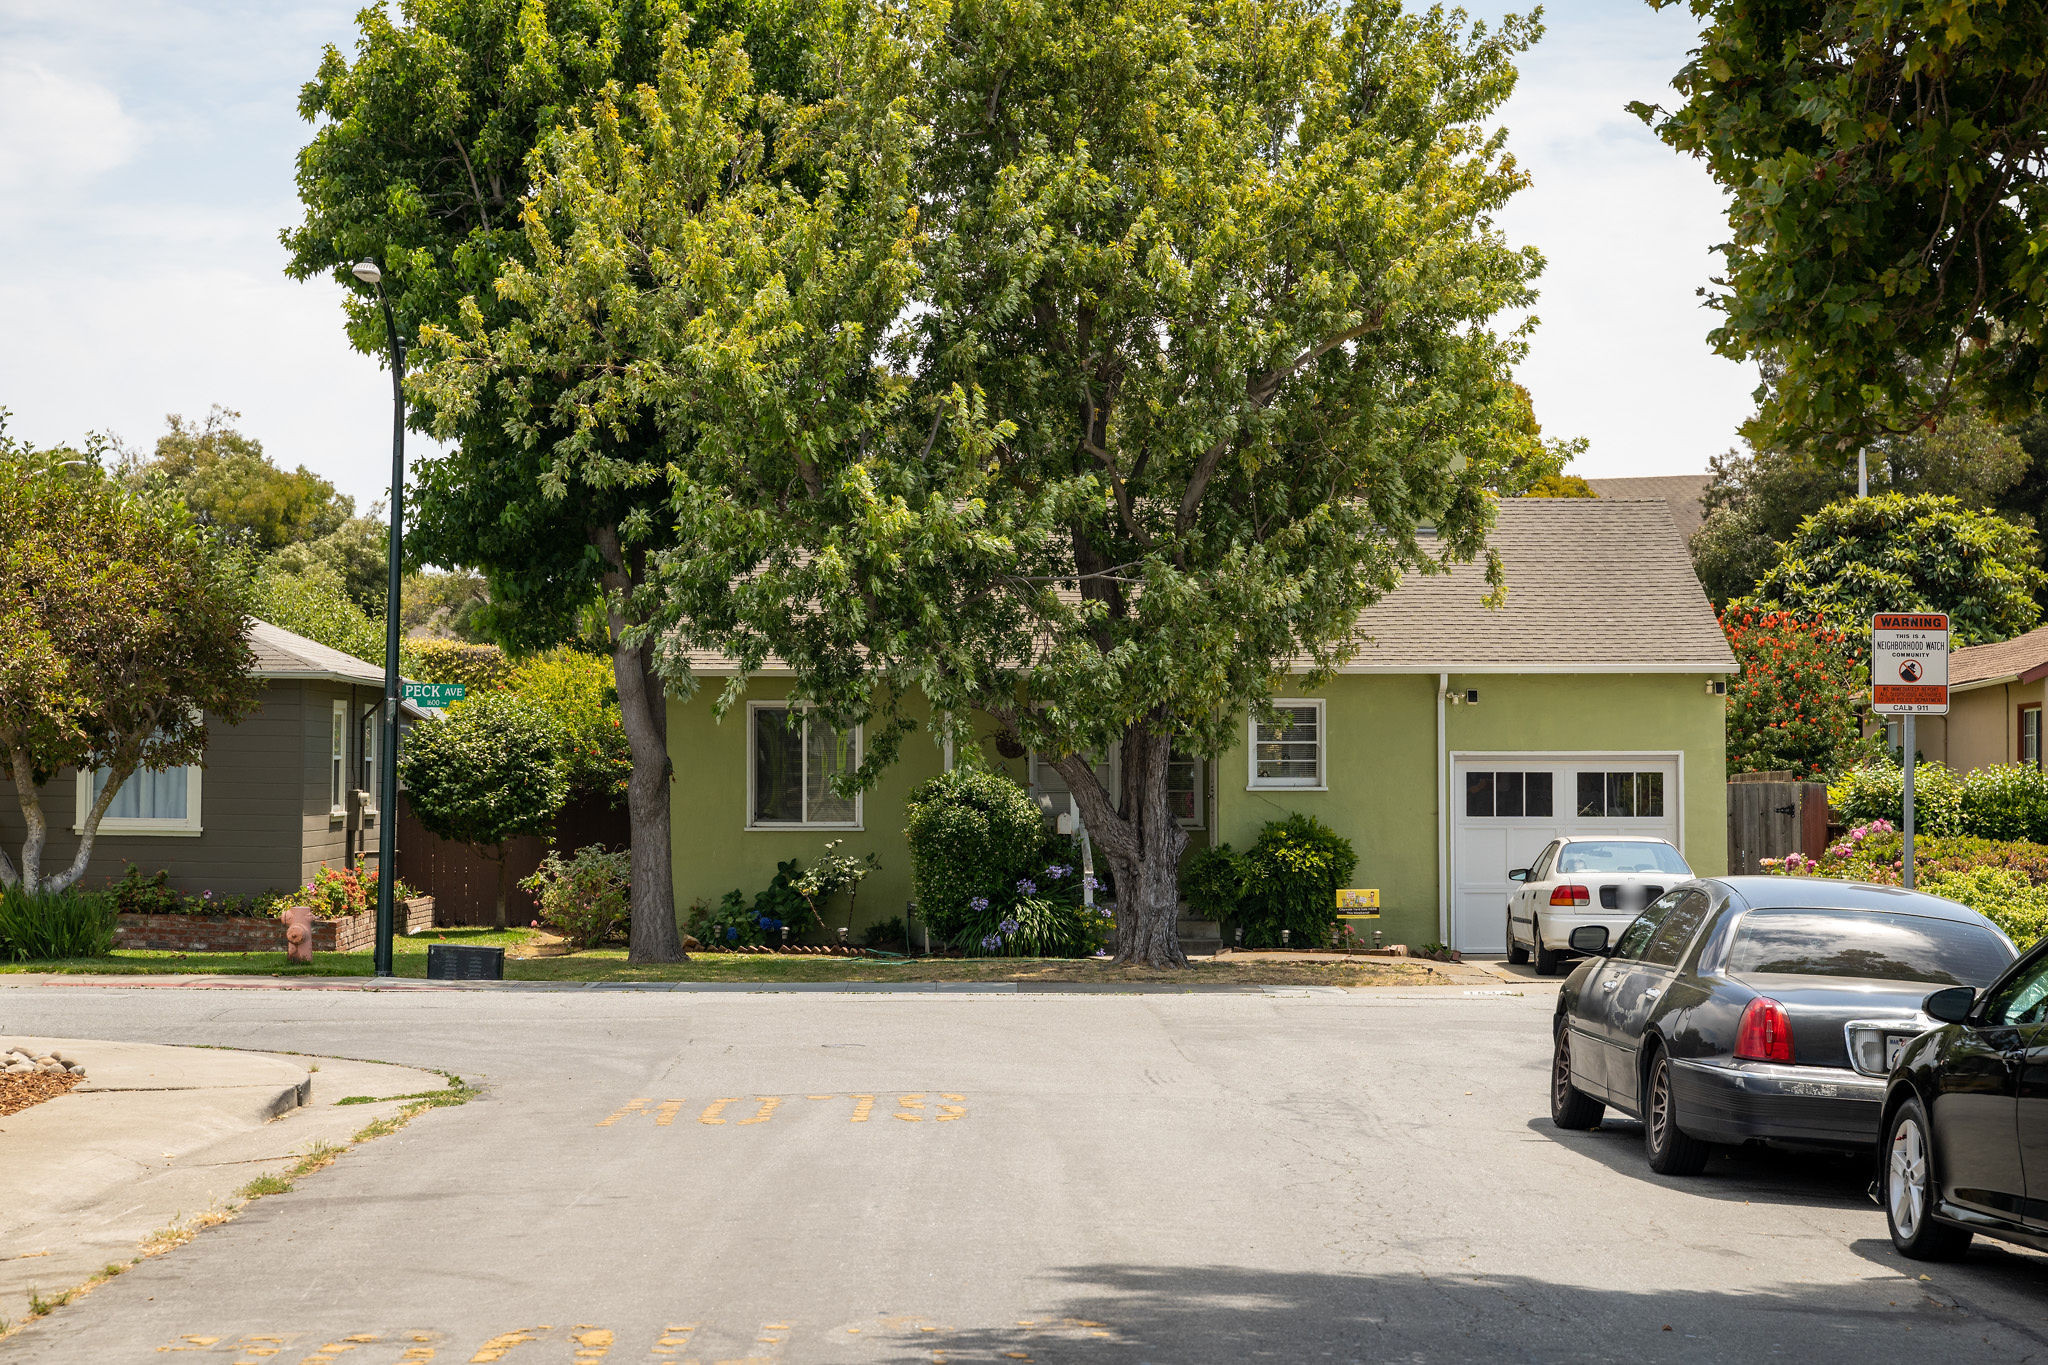 Green craftmans home with maple tree in the Shoreview area in San Mateo